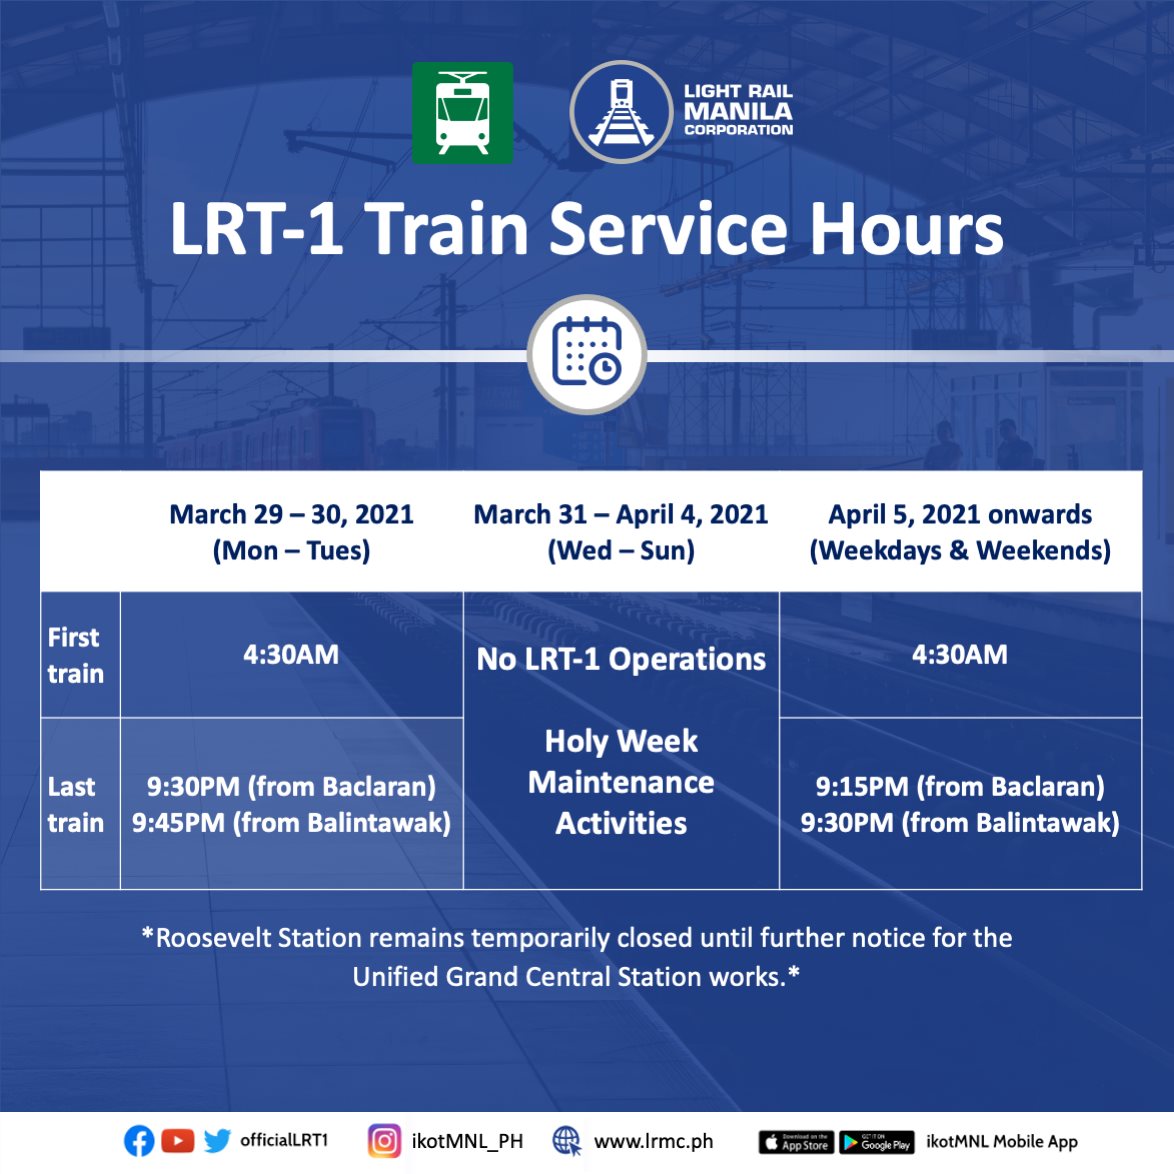 LRMC implements adjusted LRT-1 operating hours